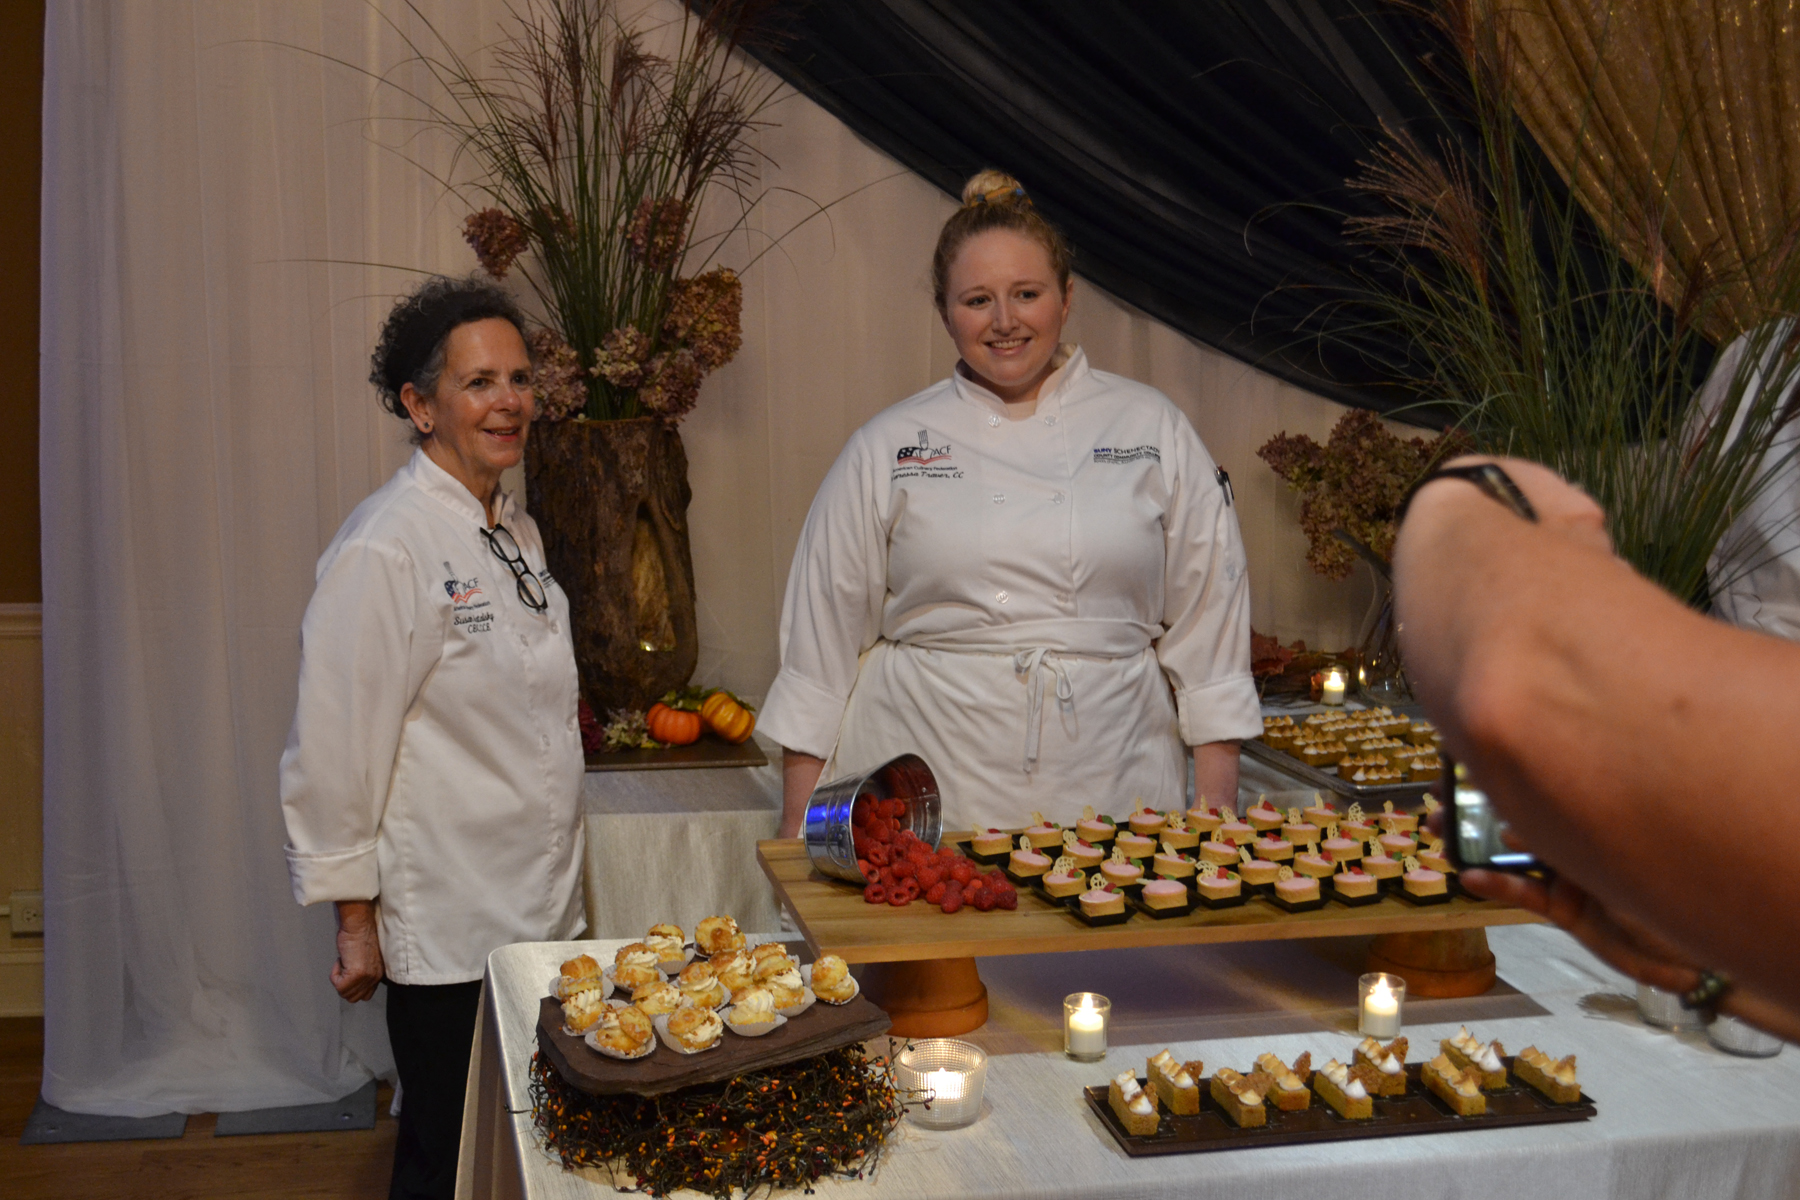 Guest Chefs Sue Hatalsky and Vanessa Traver standing in front of table of desserts